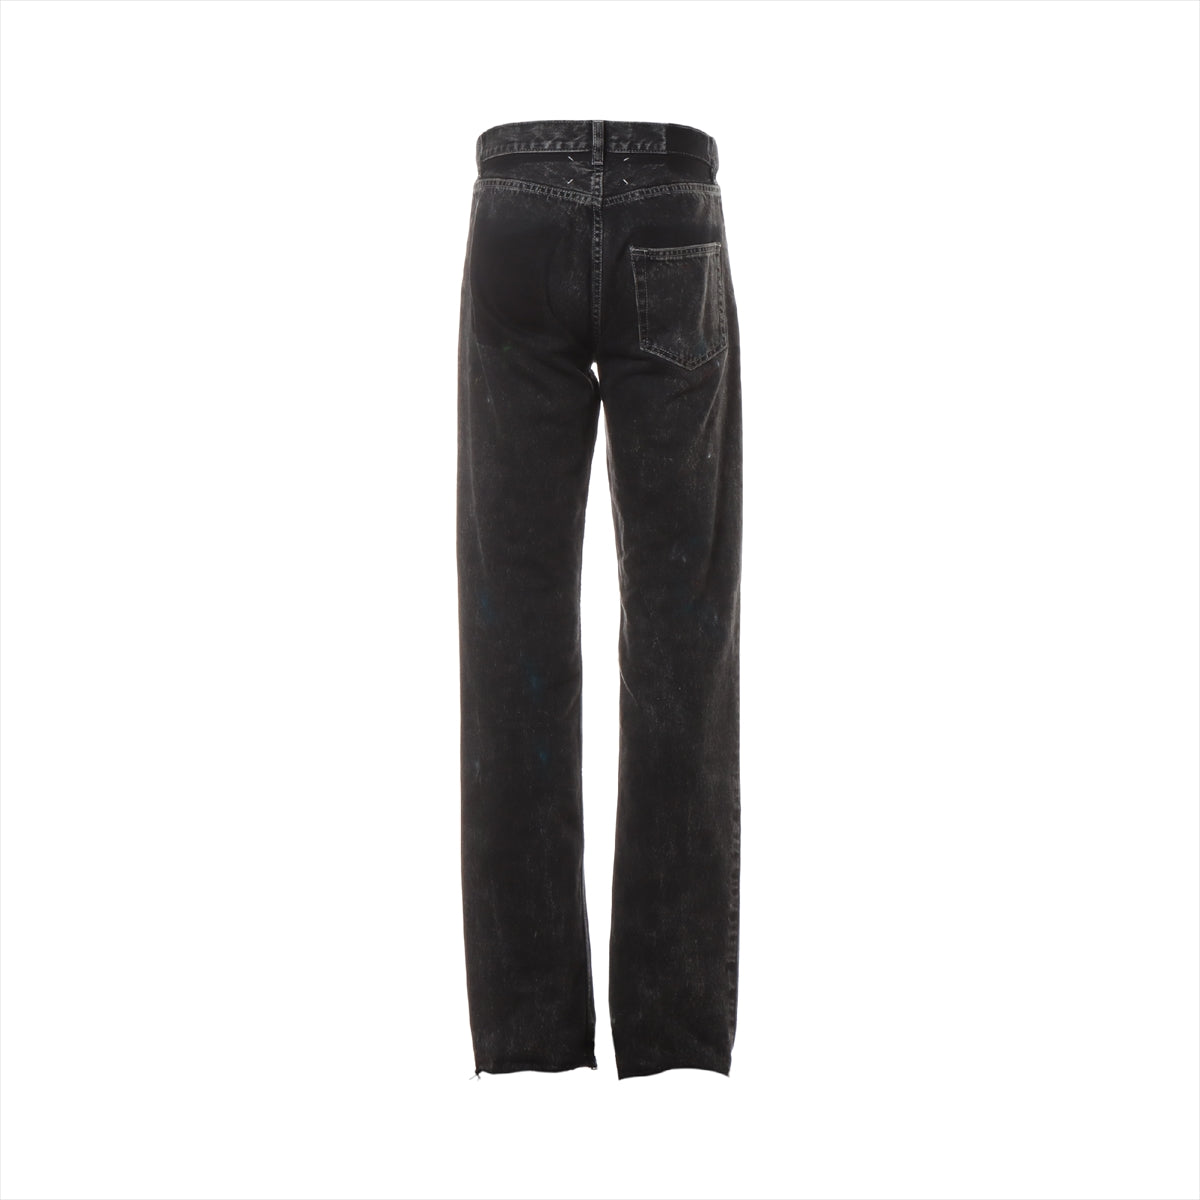 Maison Margiela 22AW Cotton Denim pants 30 Black x Gray  S50LA0207 painted Vintage processing There are padding on the pocket lining